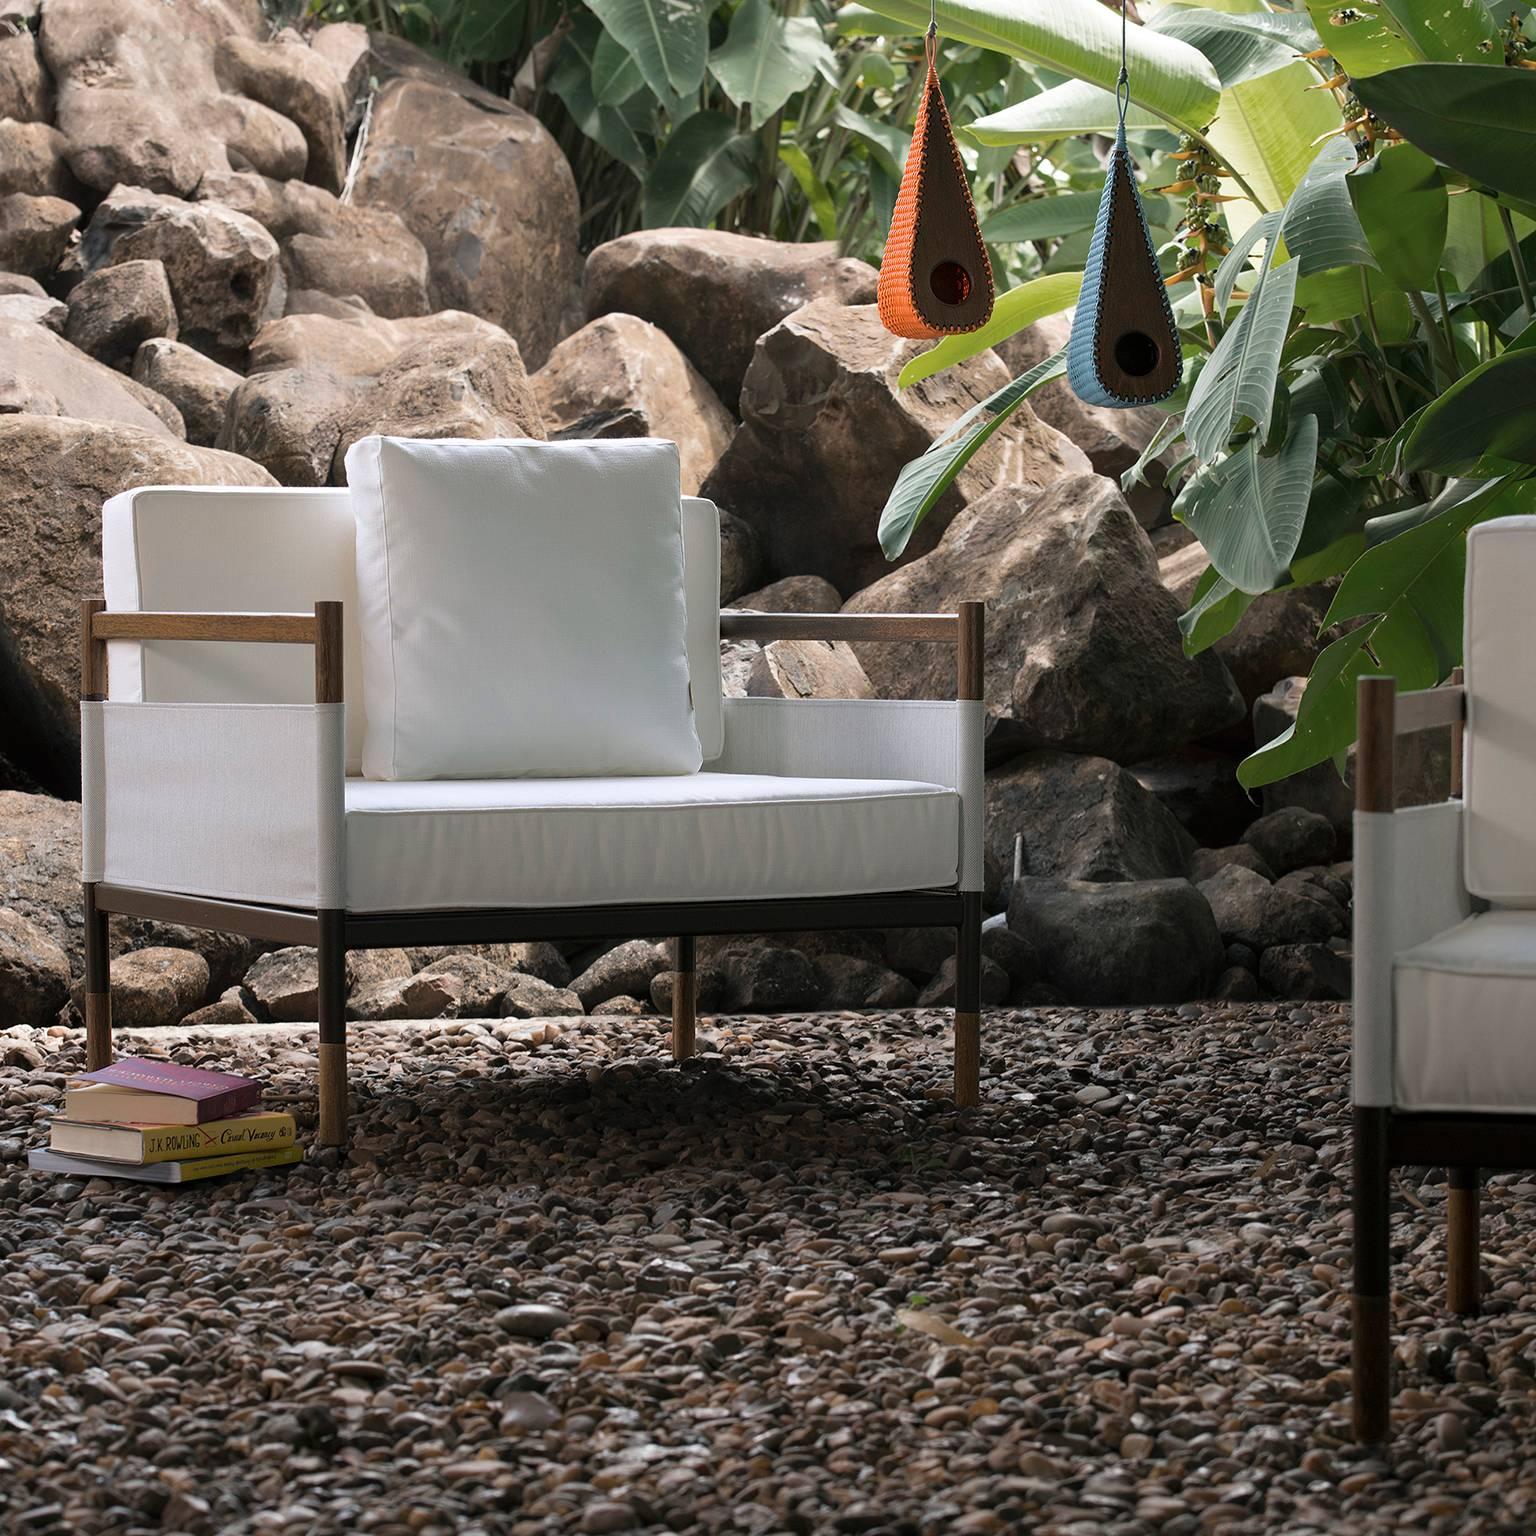 This outdoor Lounge chair is made to order in hardwood, metal and fabrics. Also classified as an armchair, the multi-finish structure is combined with outdoor fabrics such as the Batyline to create an interesting outdoor solution. Bellow the full